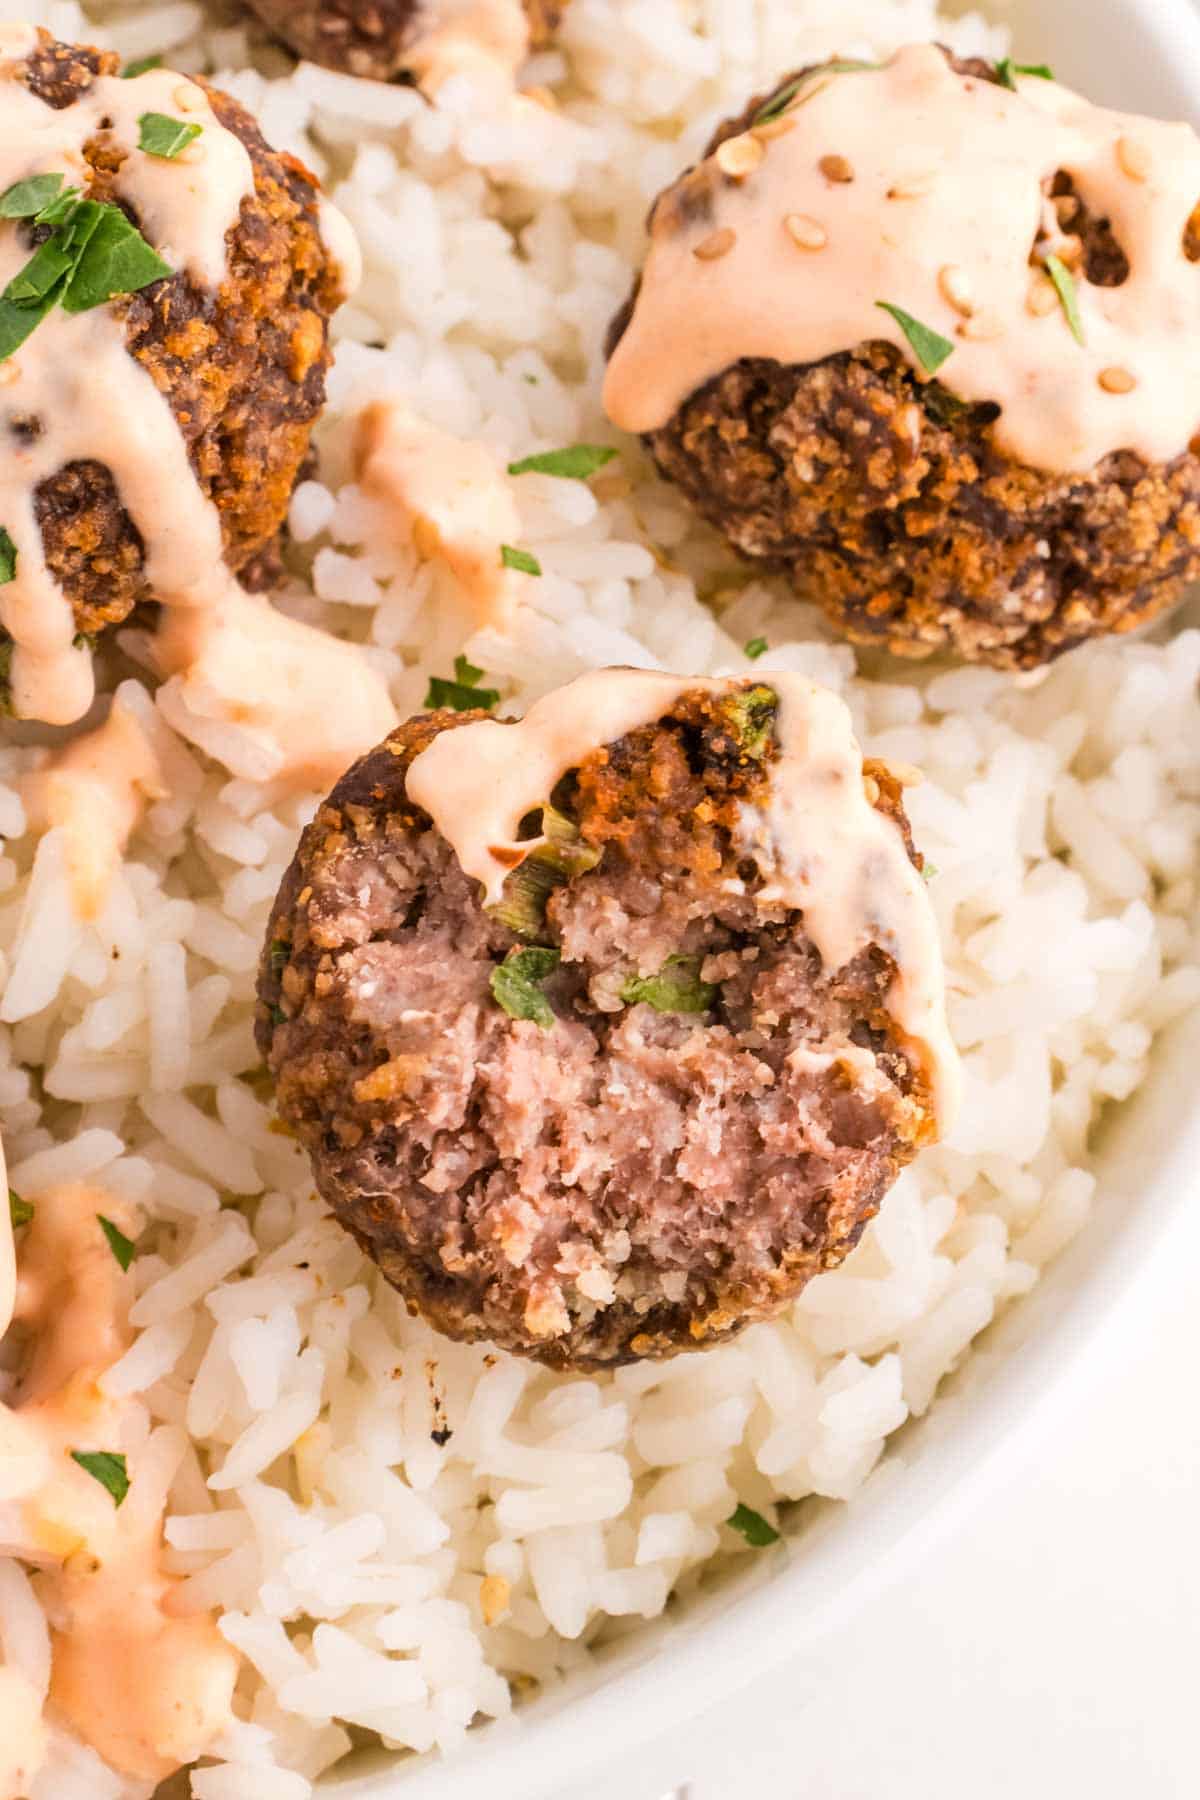 Firecracker Meatballs are flavourful homemade ground beef meatballs with a bit of a kick from siracha sauce and red pepper flakes and topped with a sour cream and mayo based sauce.